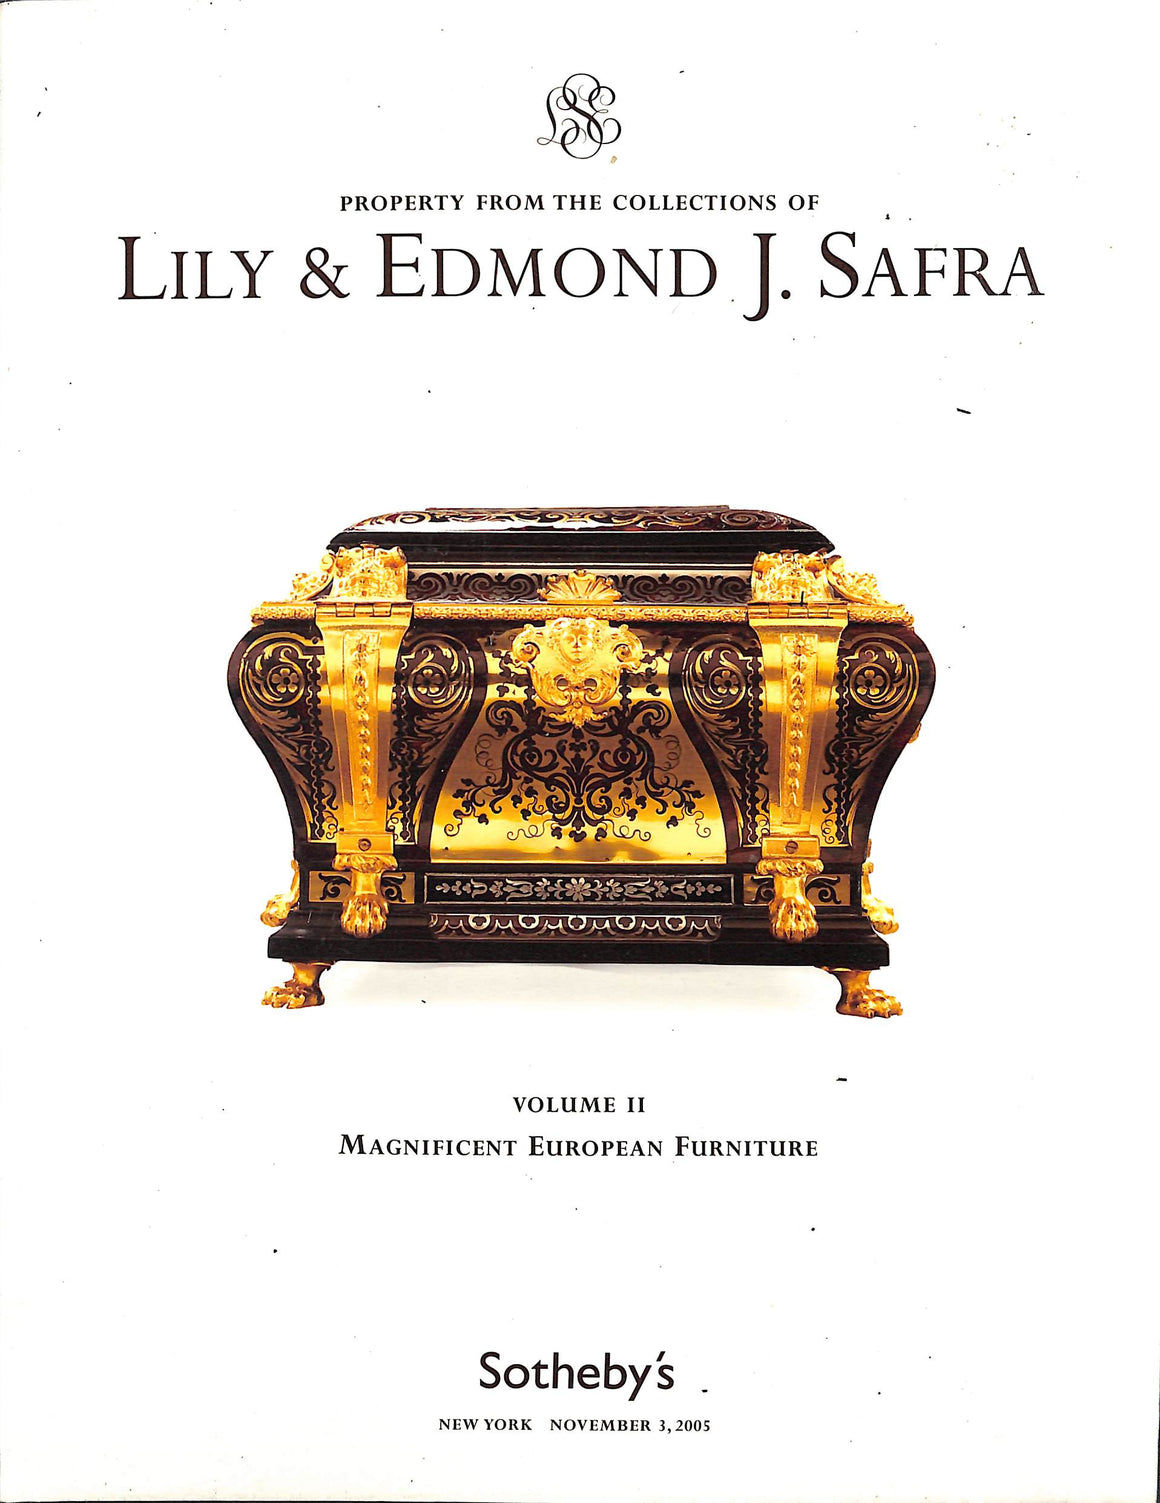 Property From The Collections Of Lily & Edmond J. Safra Volume II 2005 Sotheby's New York